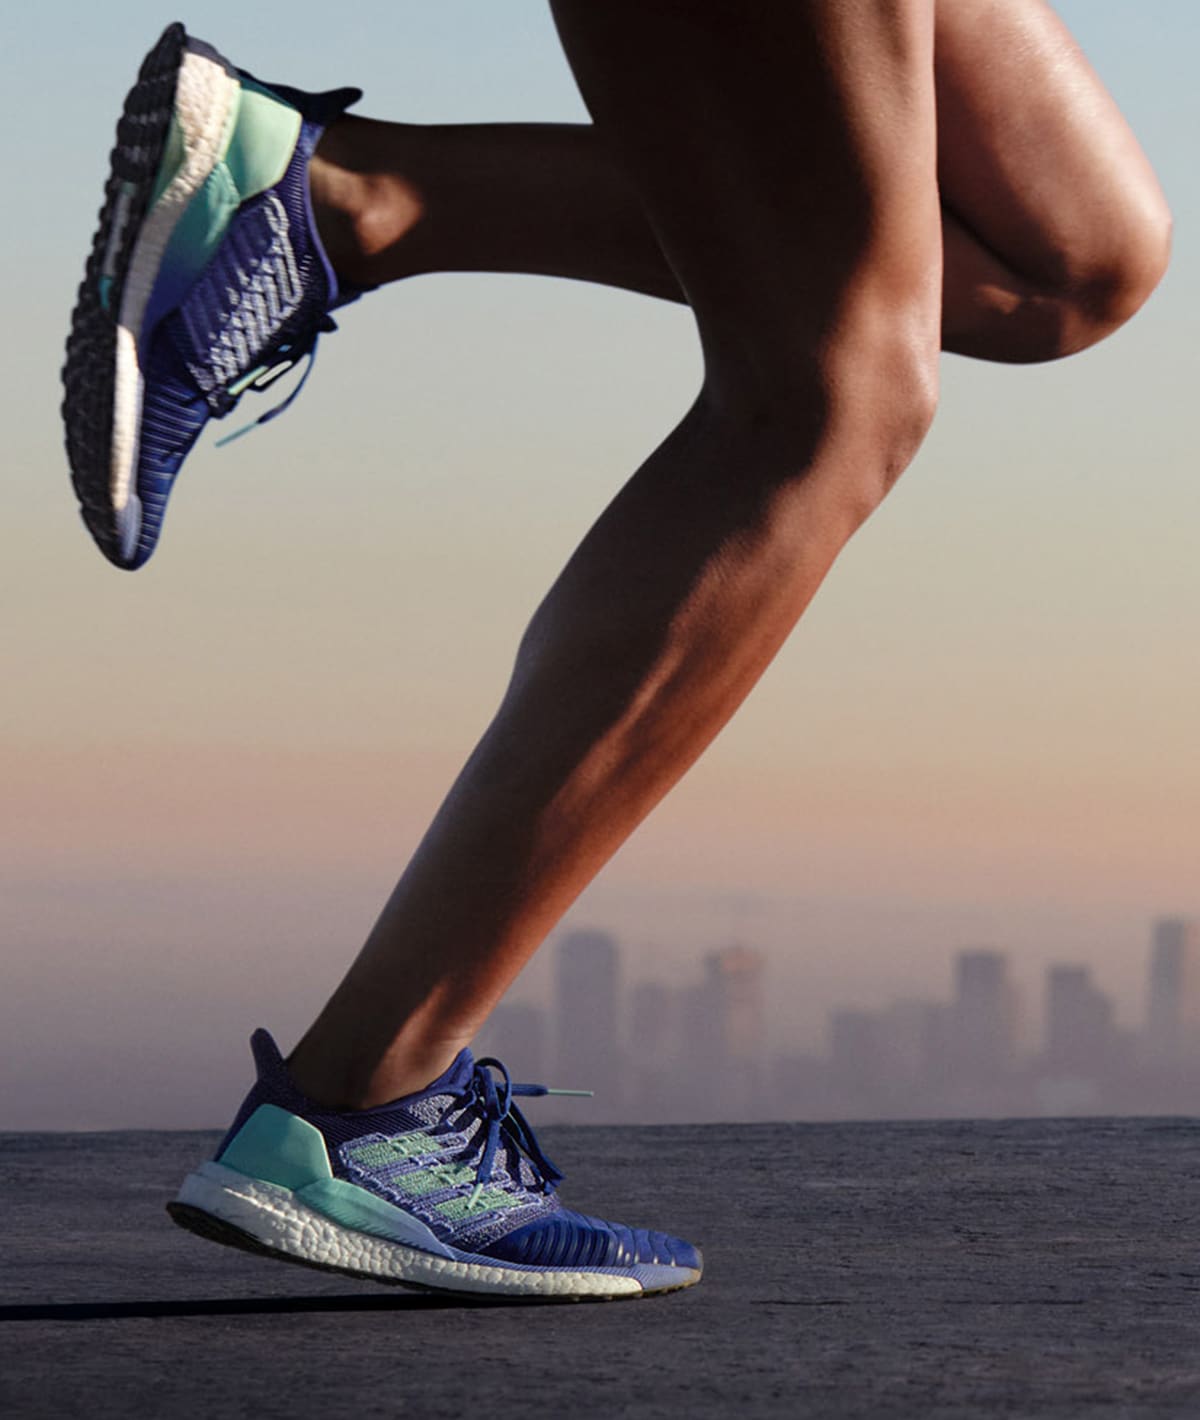 HOW TO CLEAN RUNNING SHOES